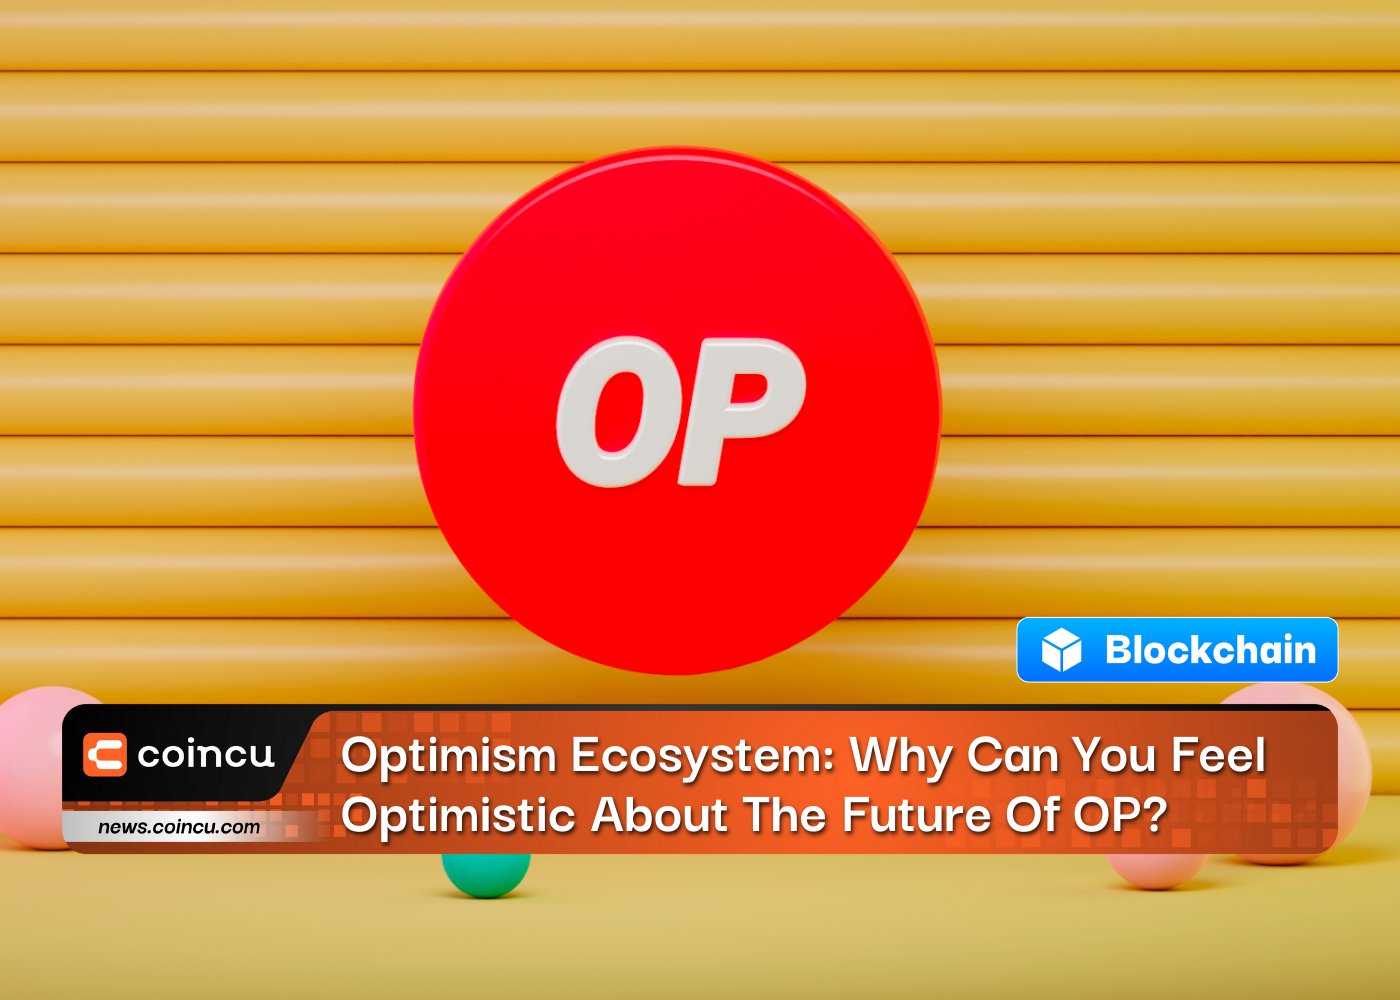 Optimism Ecosystem: Why Can You Feel Optimistic About The Future Of OP?